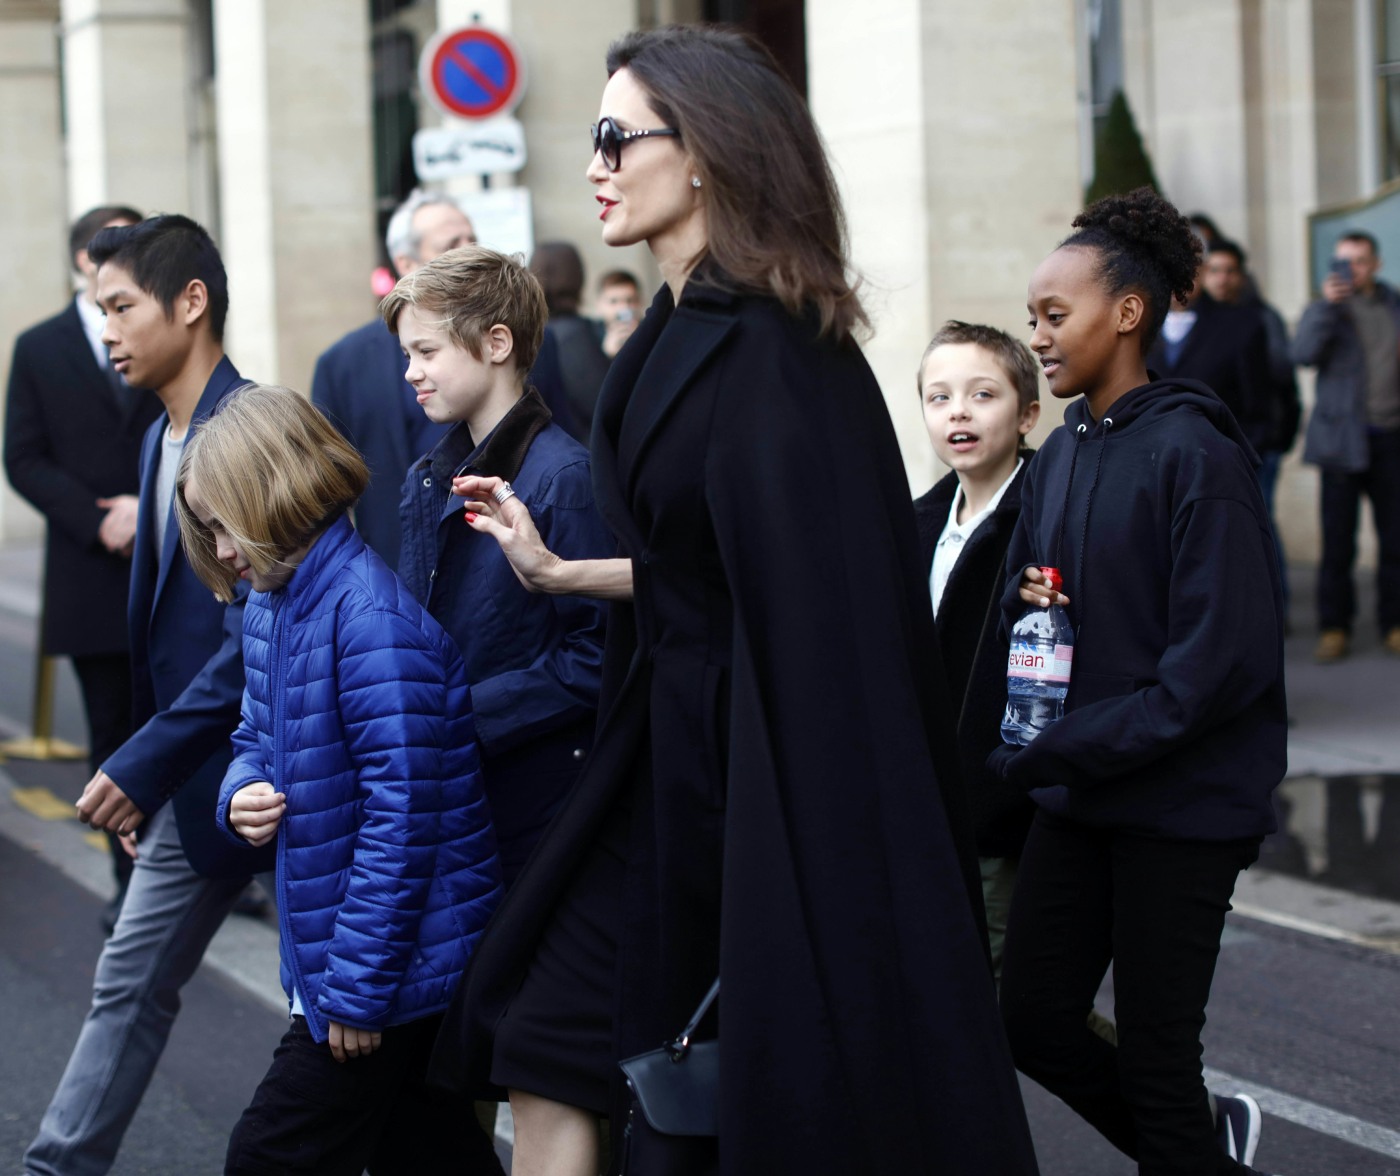 Angelina Jolie visits The Louvre in Paris with her kids